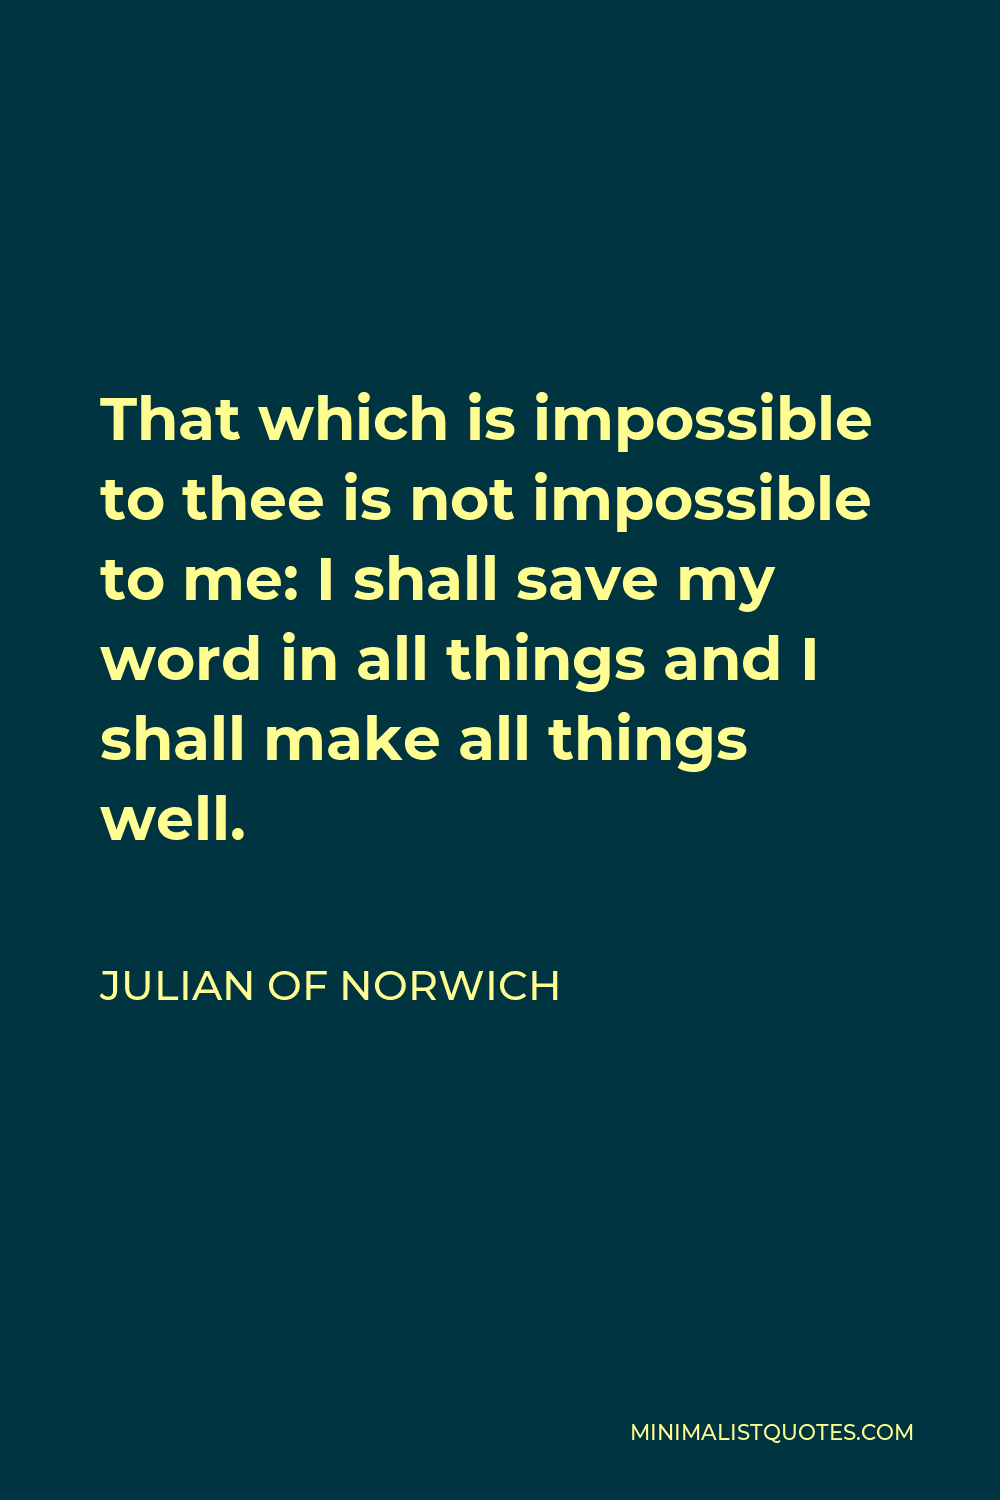 Julian of Norwich Quote - That which is impossible to thee is not impossible to me: I shall save my word in all things and I shall make all things well.